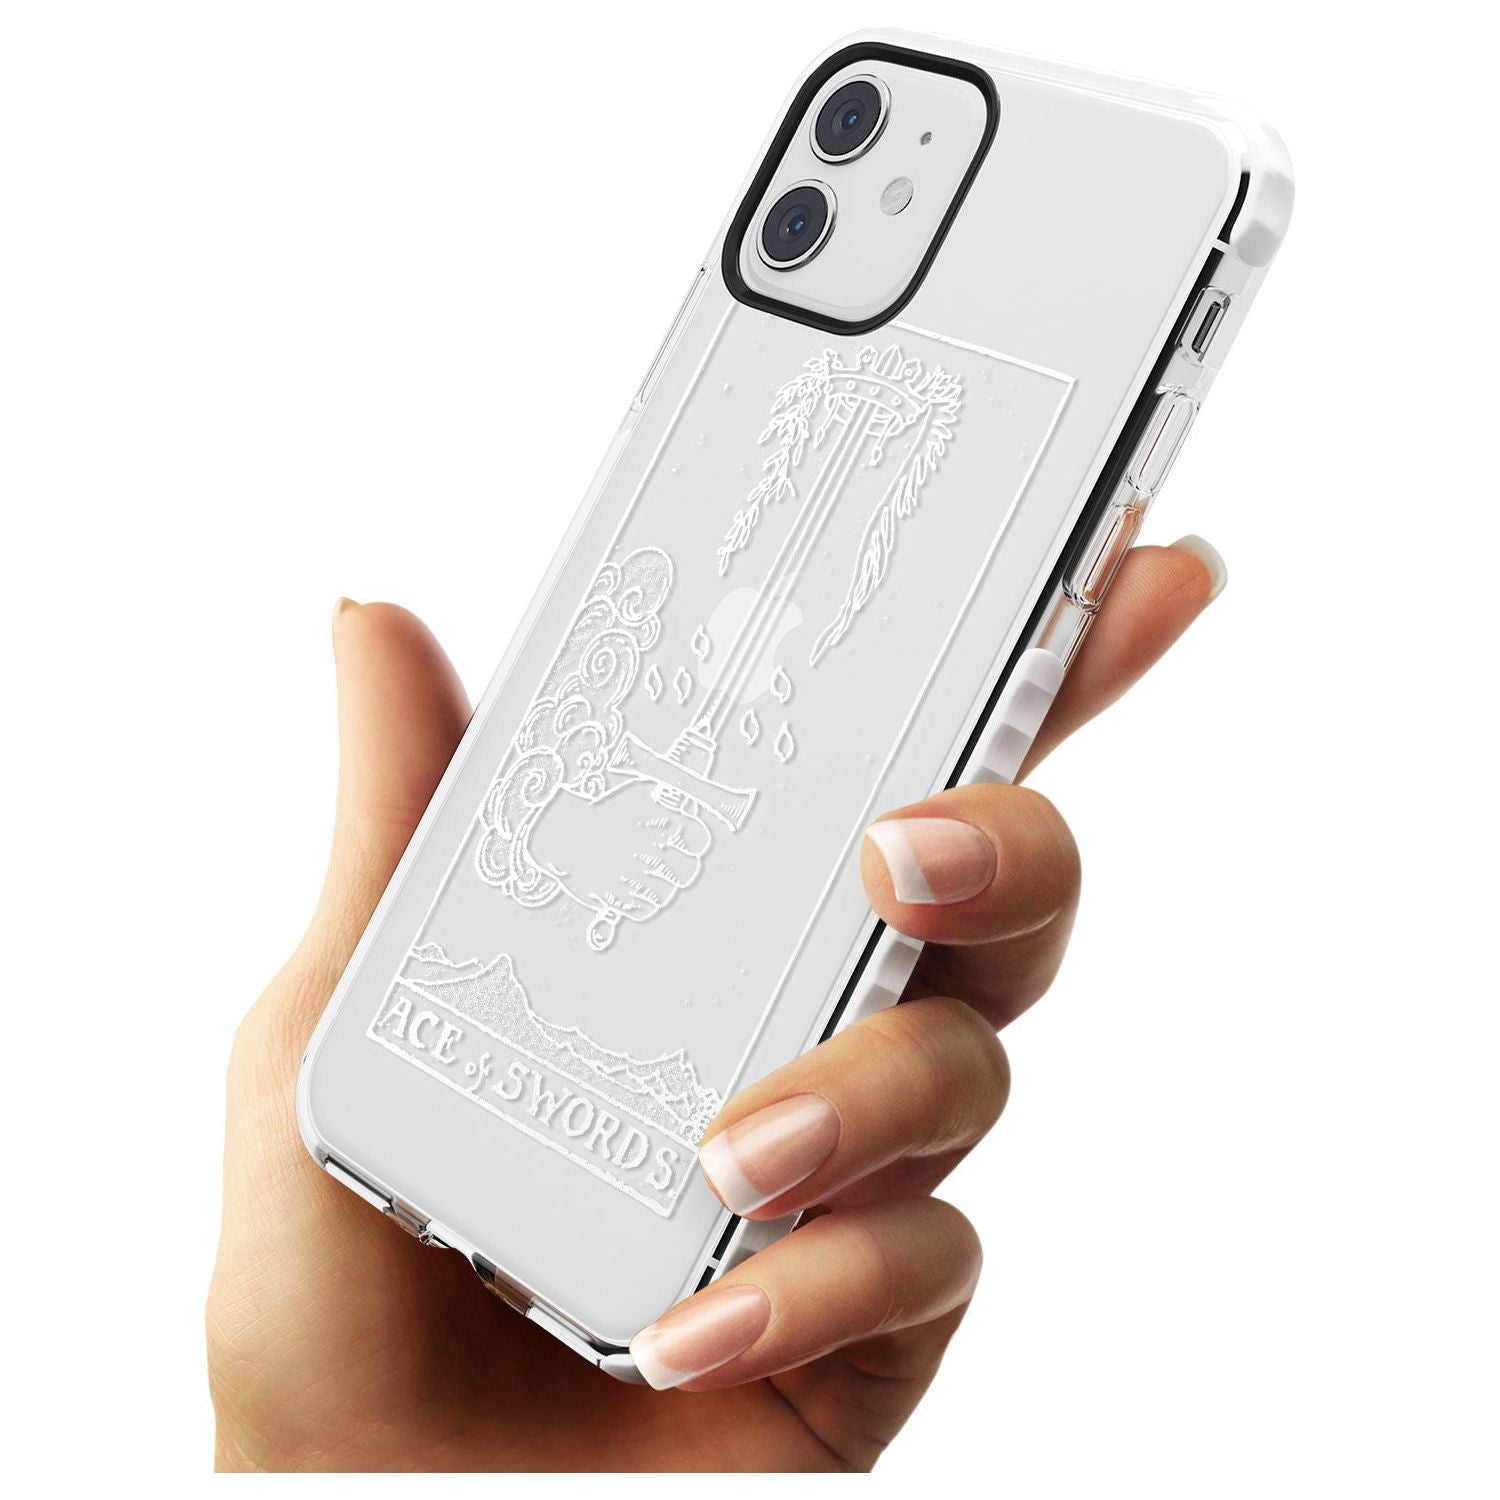 Ace of Swords Tarot Card - White Transparent Slim TPU Phone Case for iPhone 11